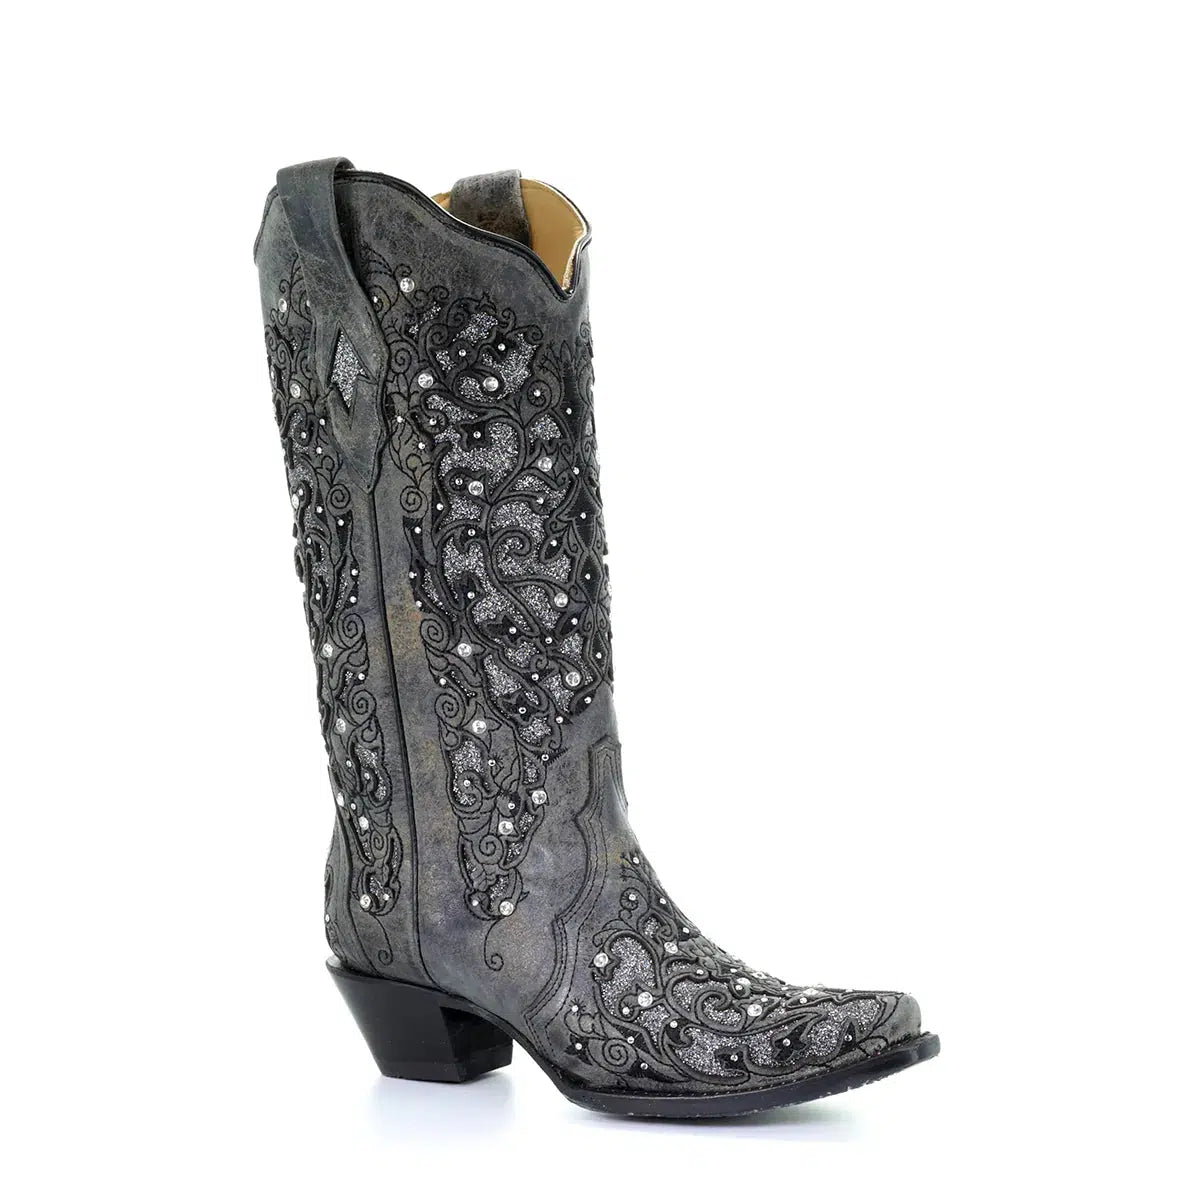 A3672 - Corral grey western cowgirl leather tall boots for women-Kuet.us